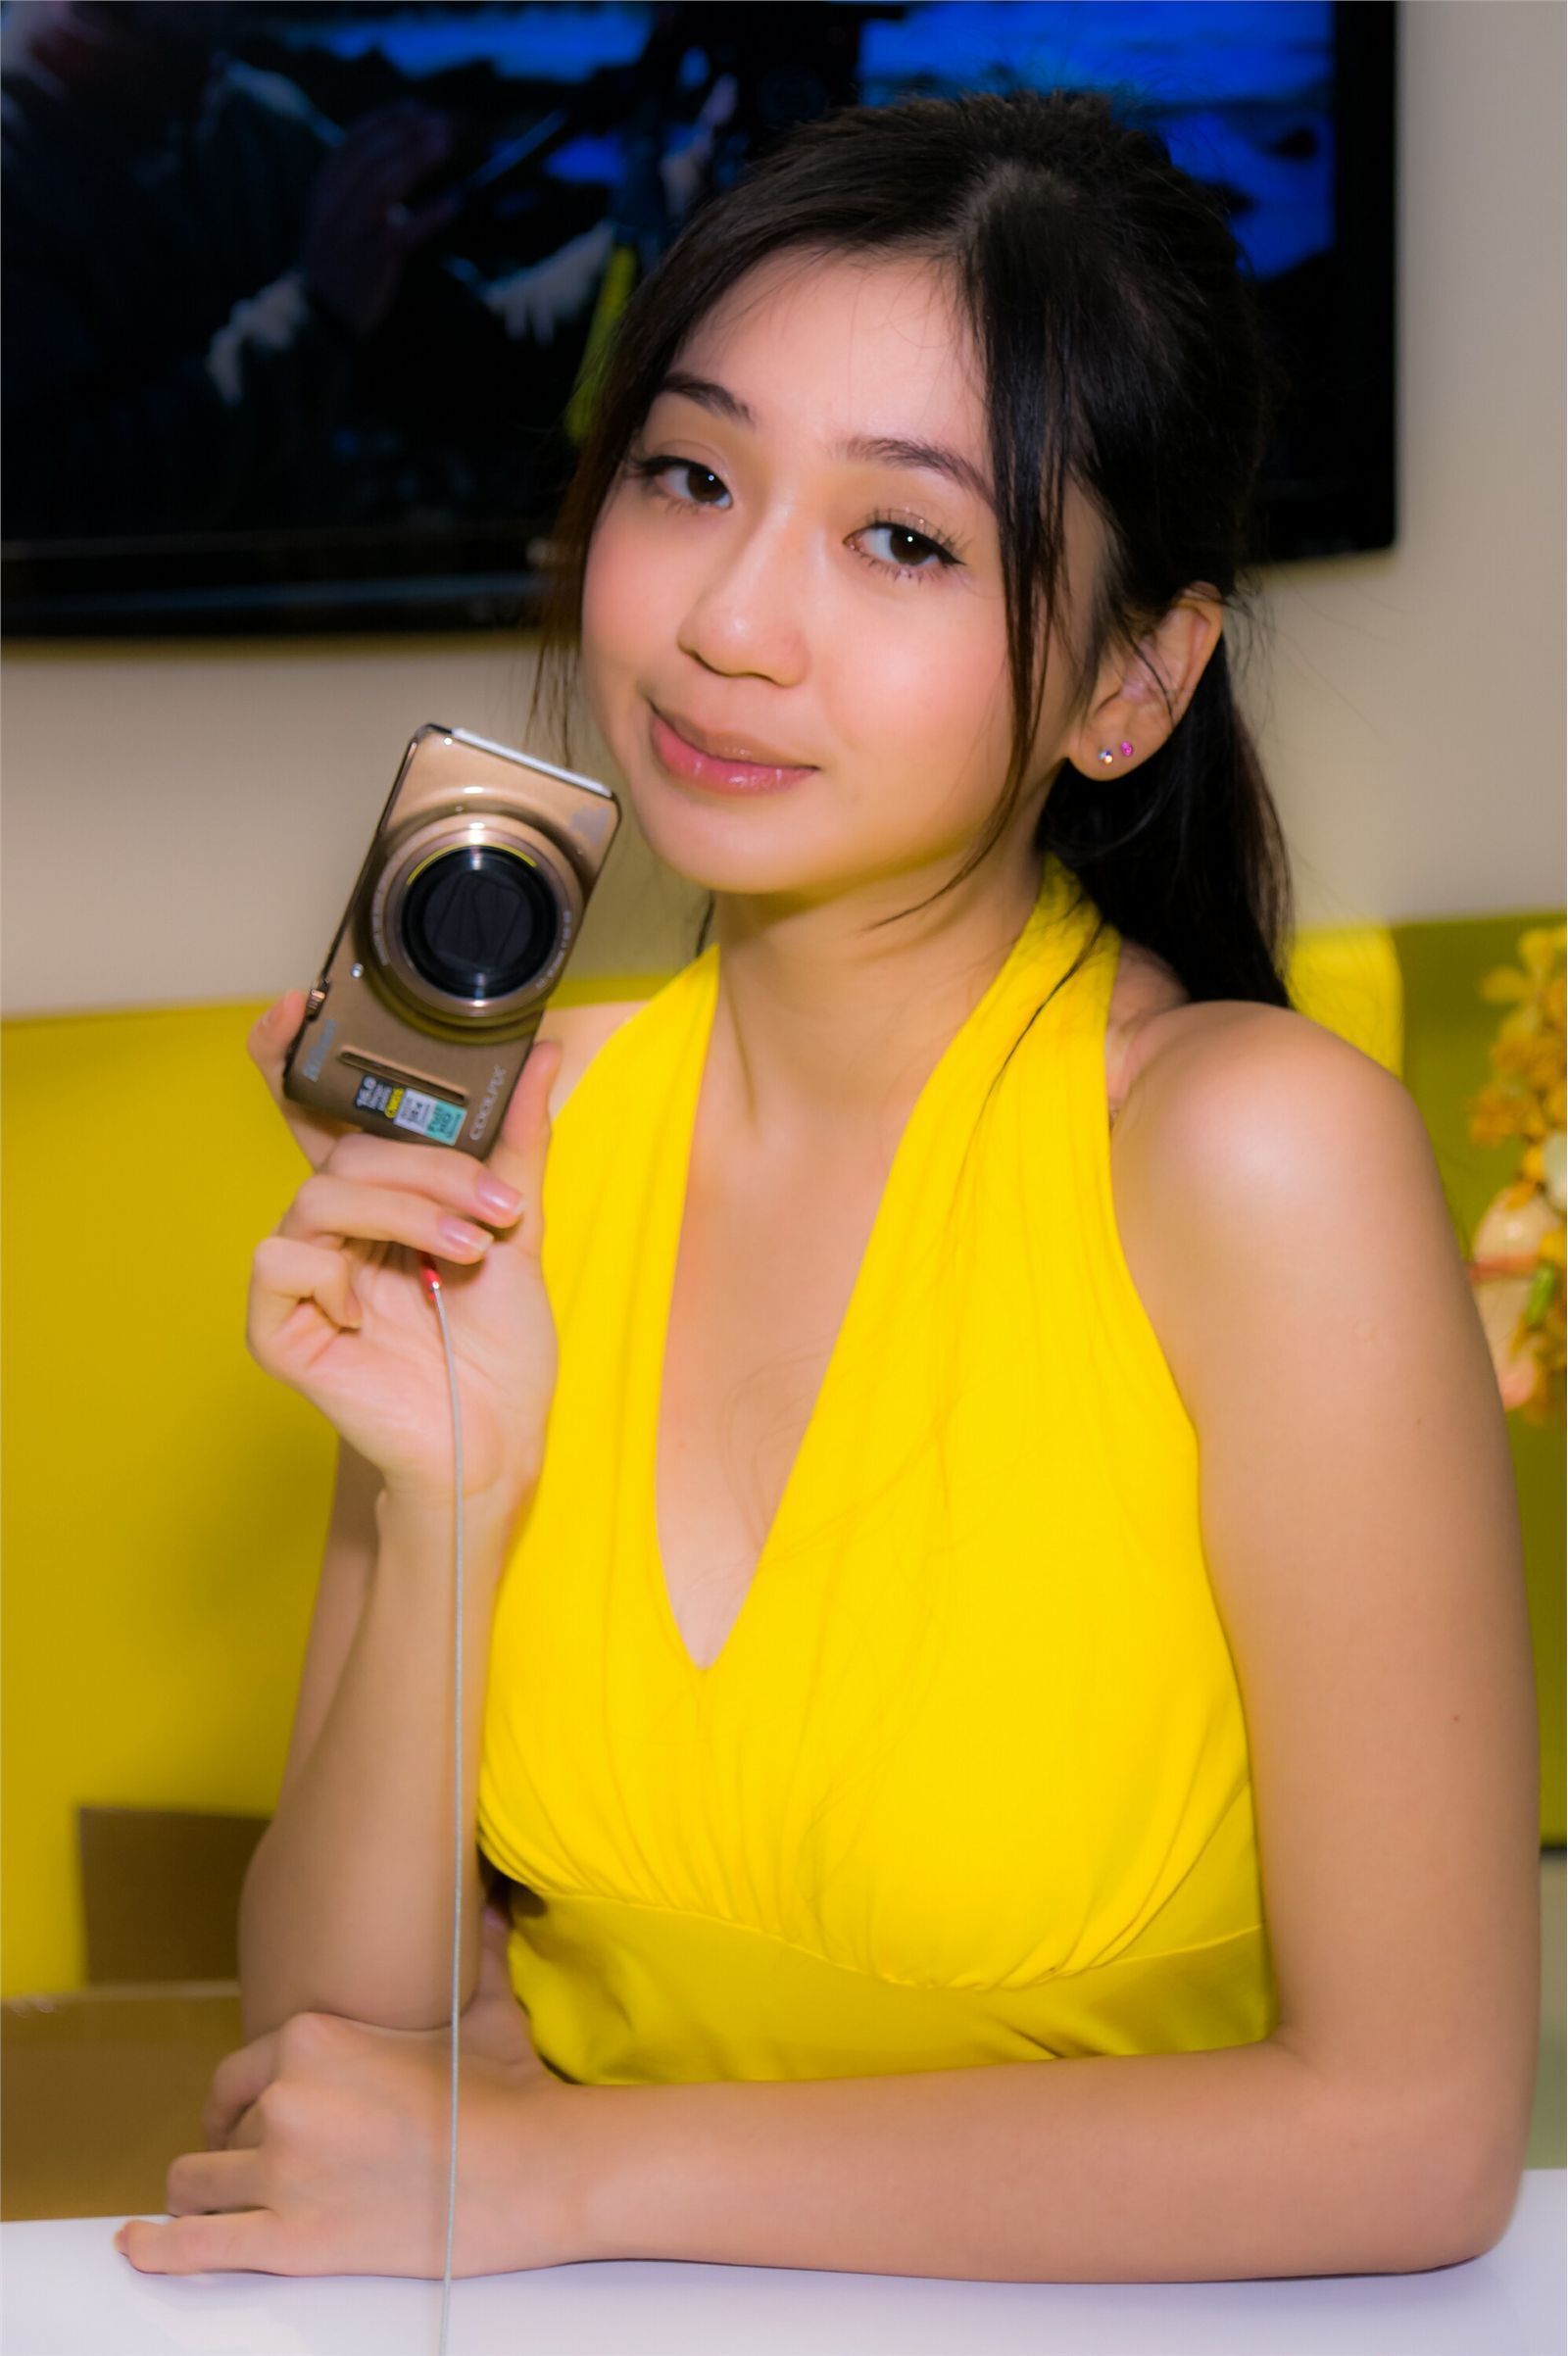 Pictures of domestic models and beauties in 2012 Taipei international digital photography equipment and image exhibition